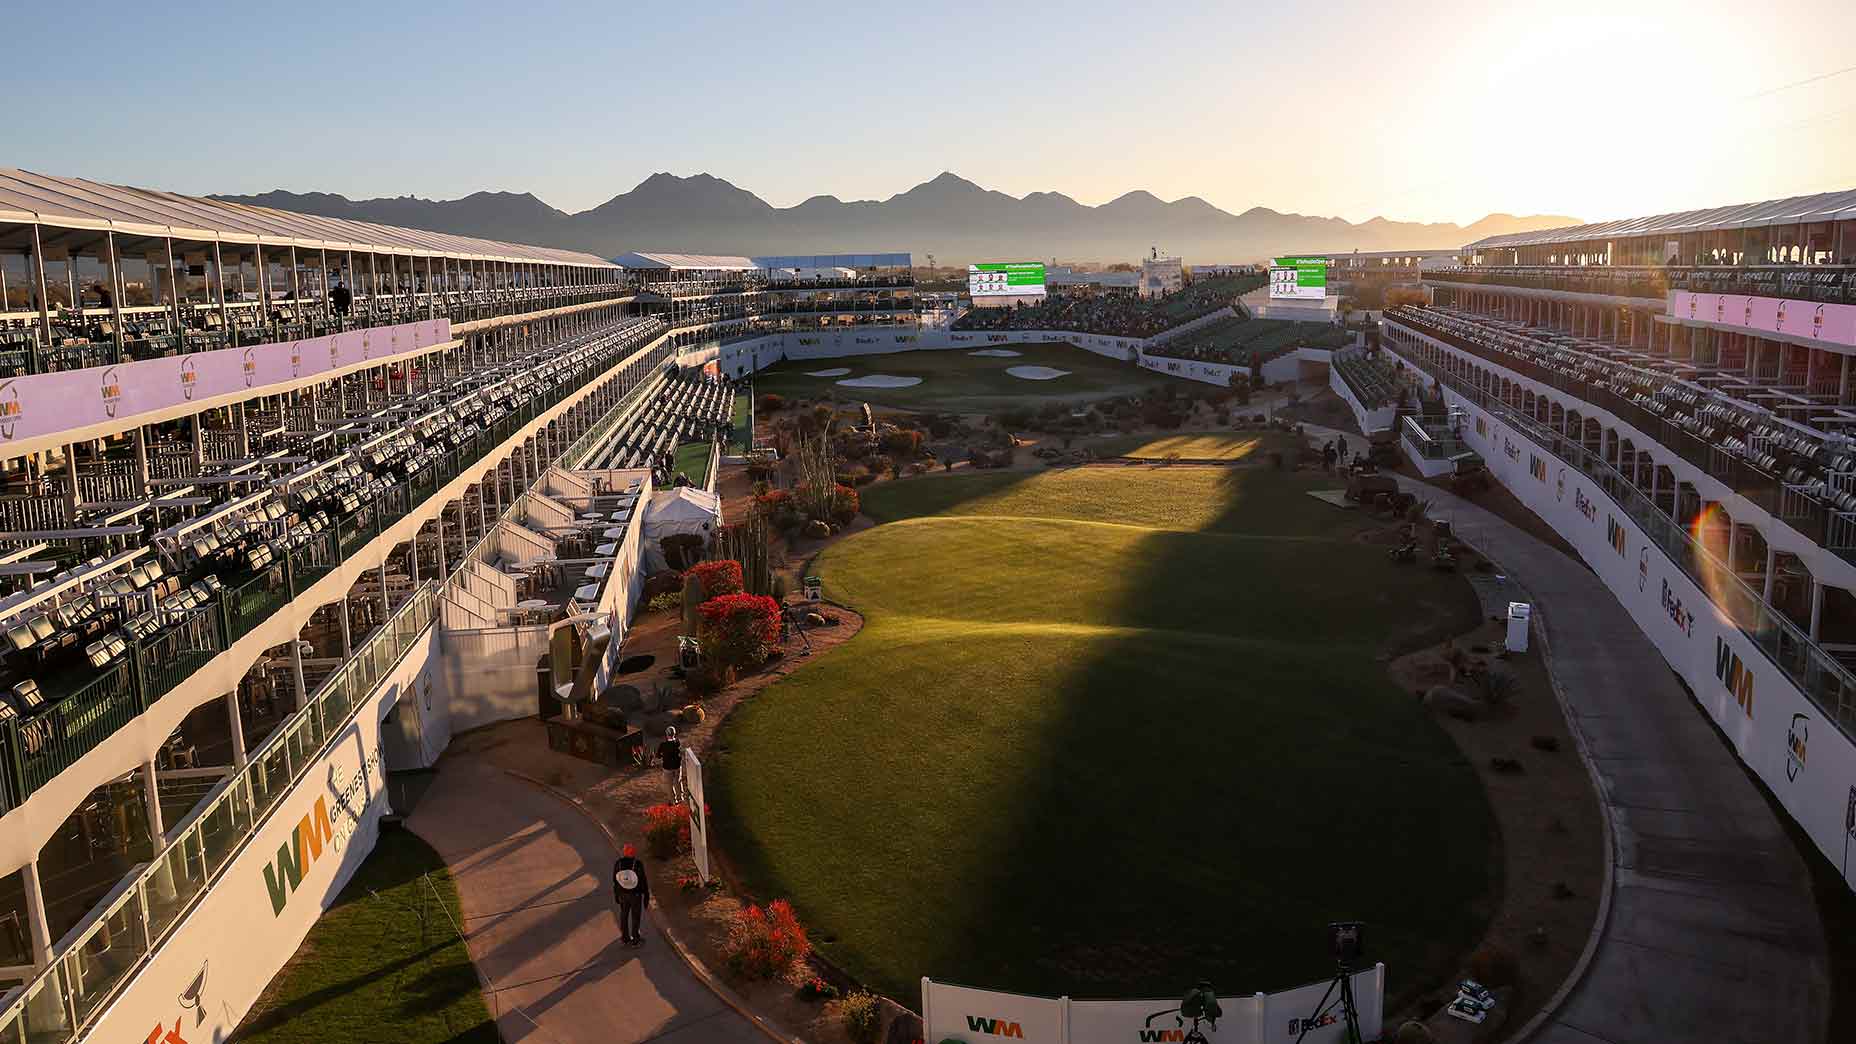 The 16th hole at tpc scottsdale's stadium course